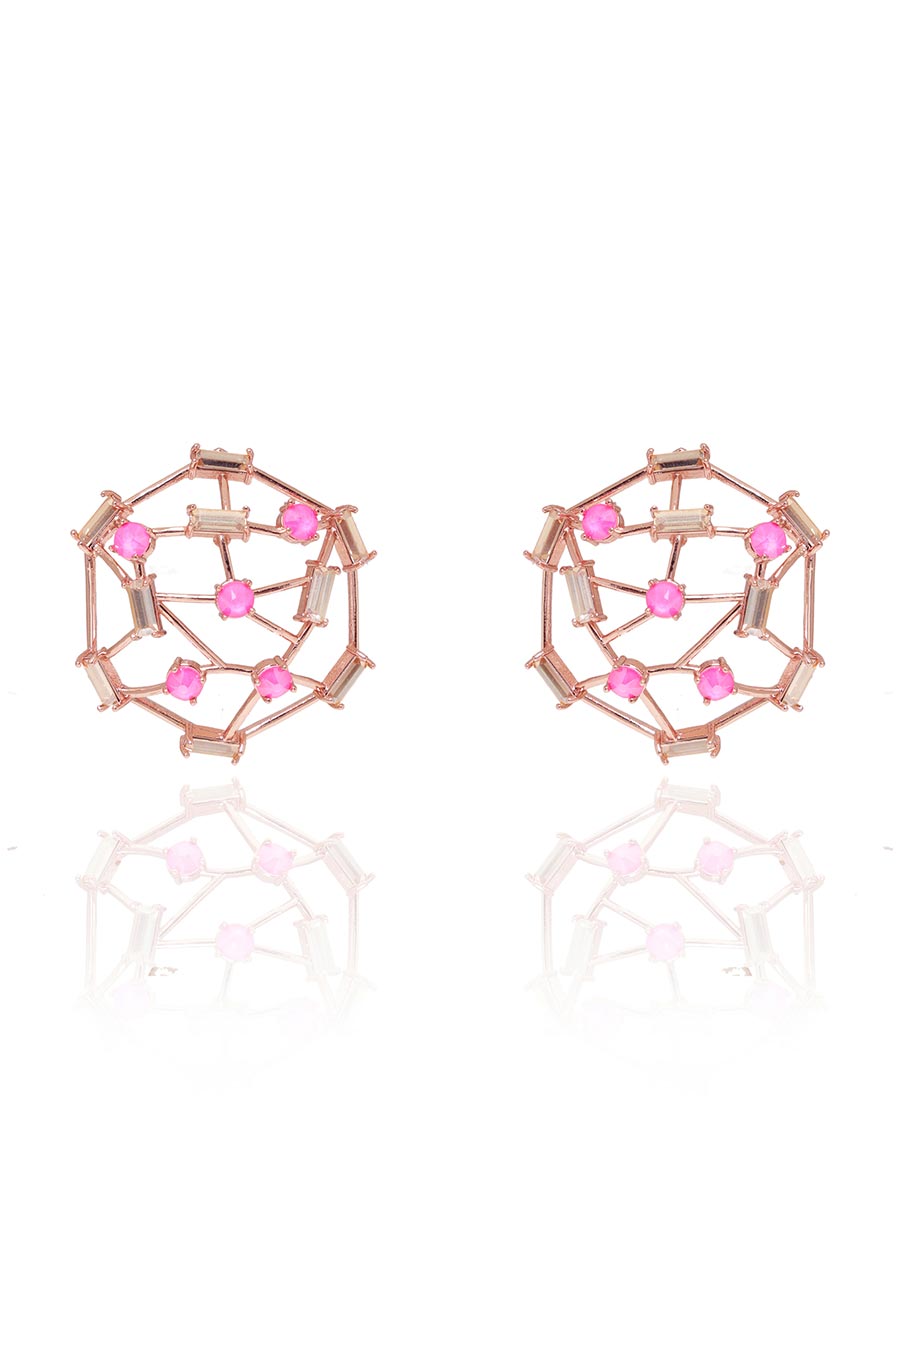 Candy Floss - Pink Swarovski Cage Stud Earrings